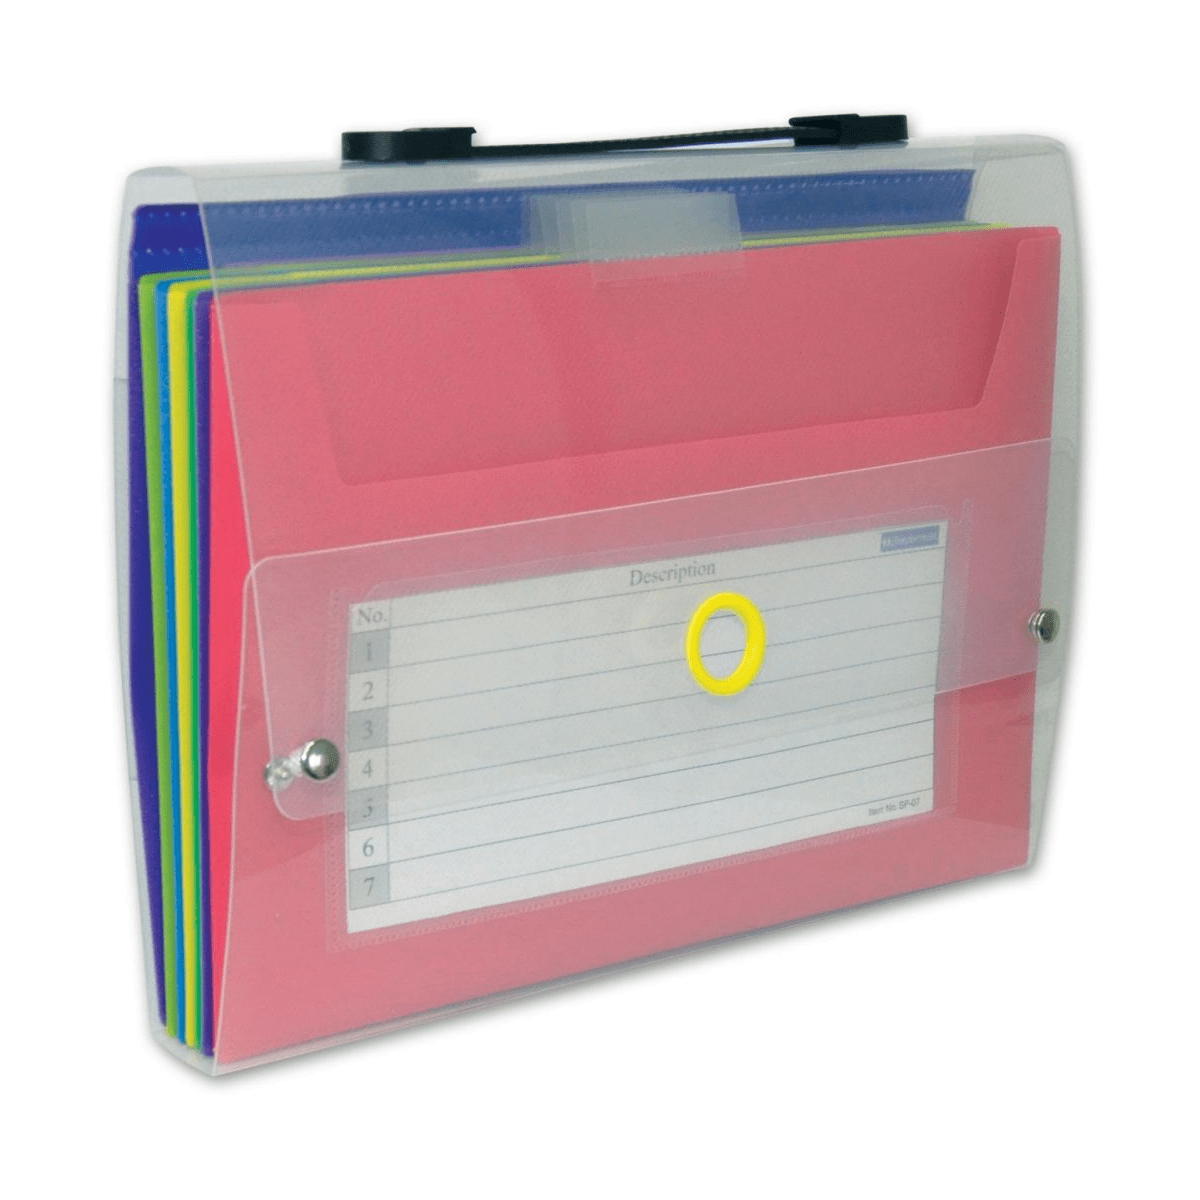 Sliding File With 7 Pockets, Clear Strip Cover, Color Pockets